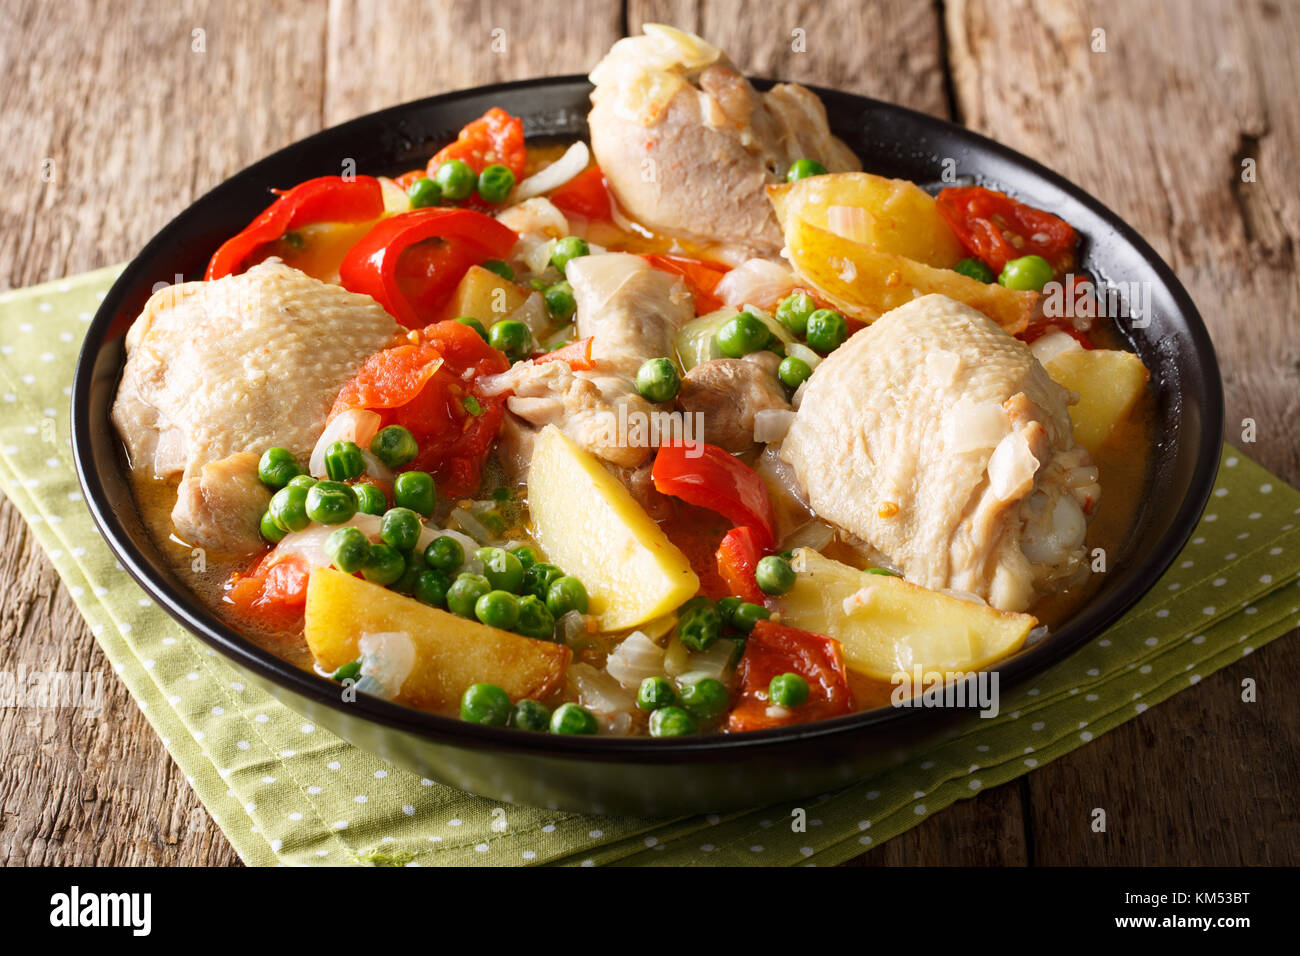 Chicken meat stewed with vegetables and spices close-up in a bowl on the table. horizontal Stock Photo